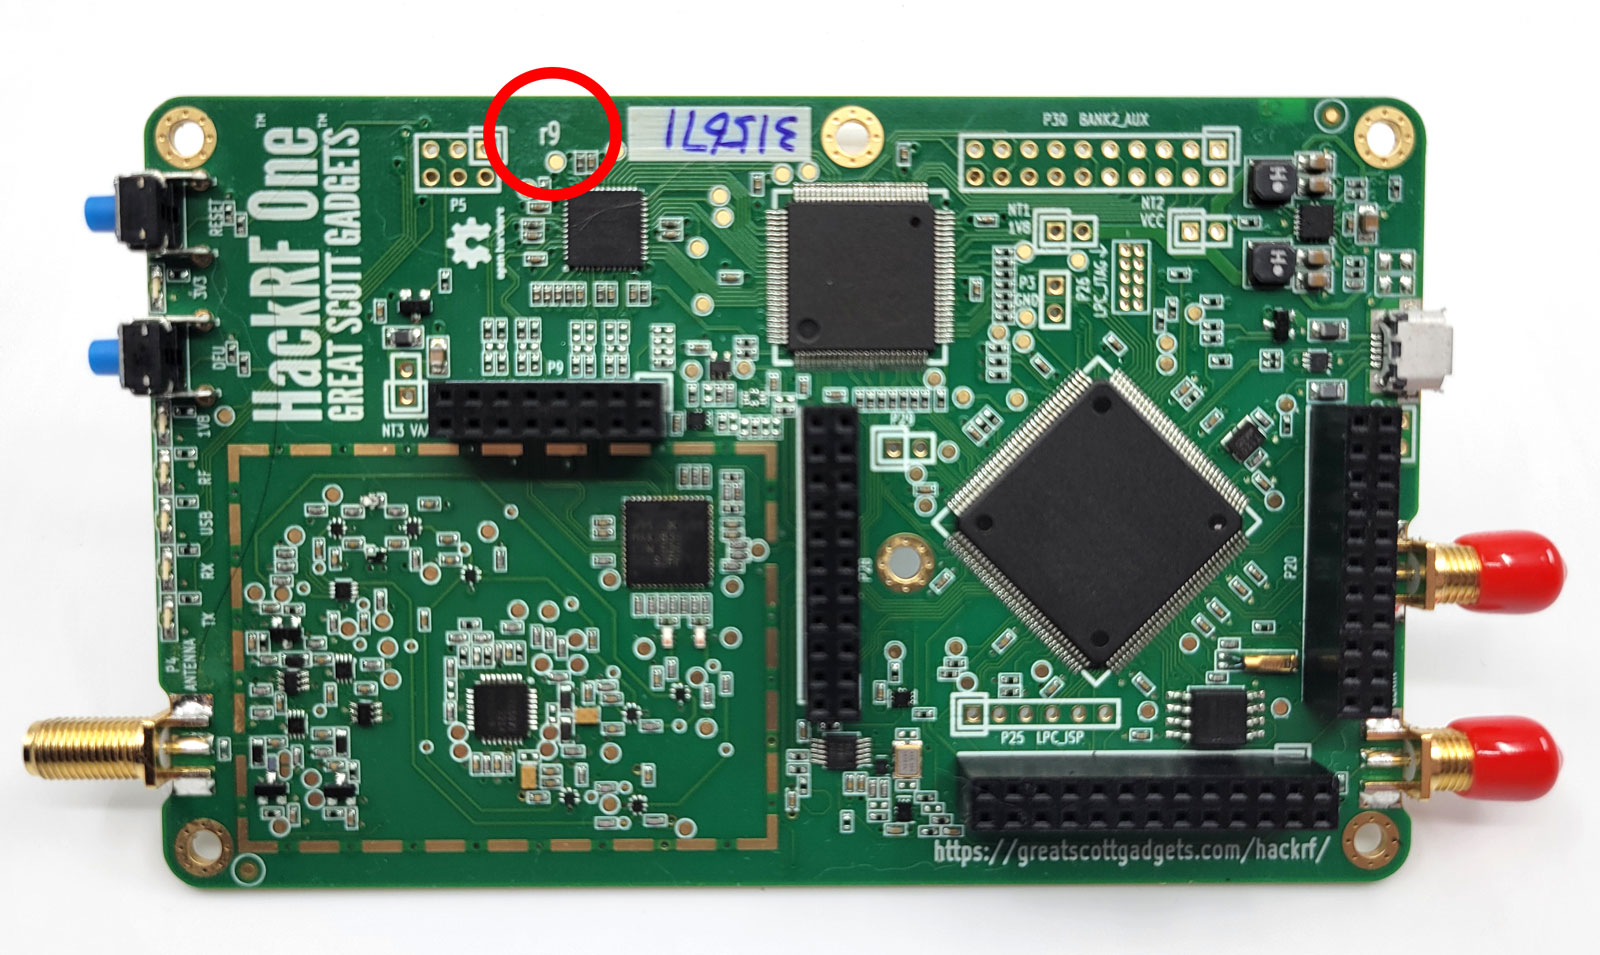 Identifying the r9 version of the HackRF One